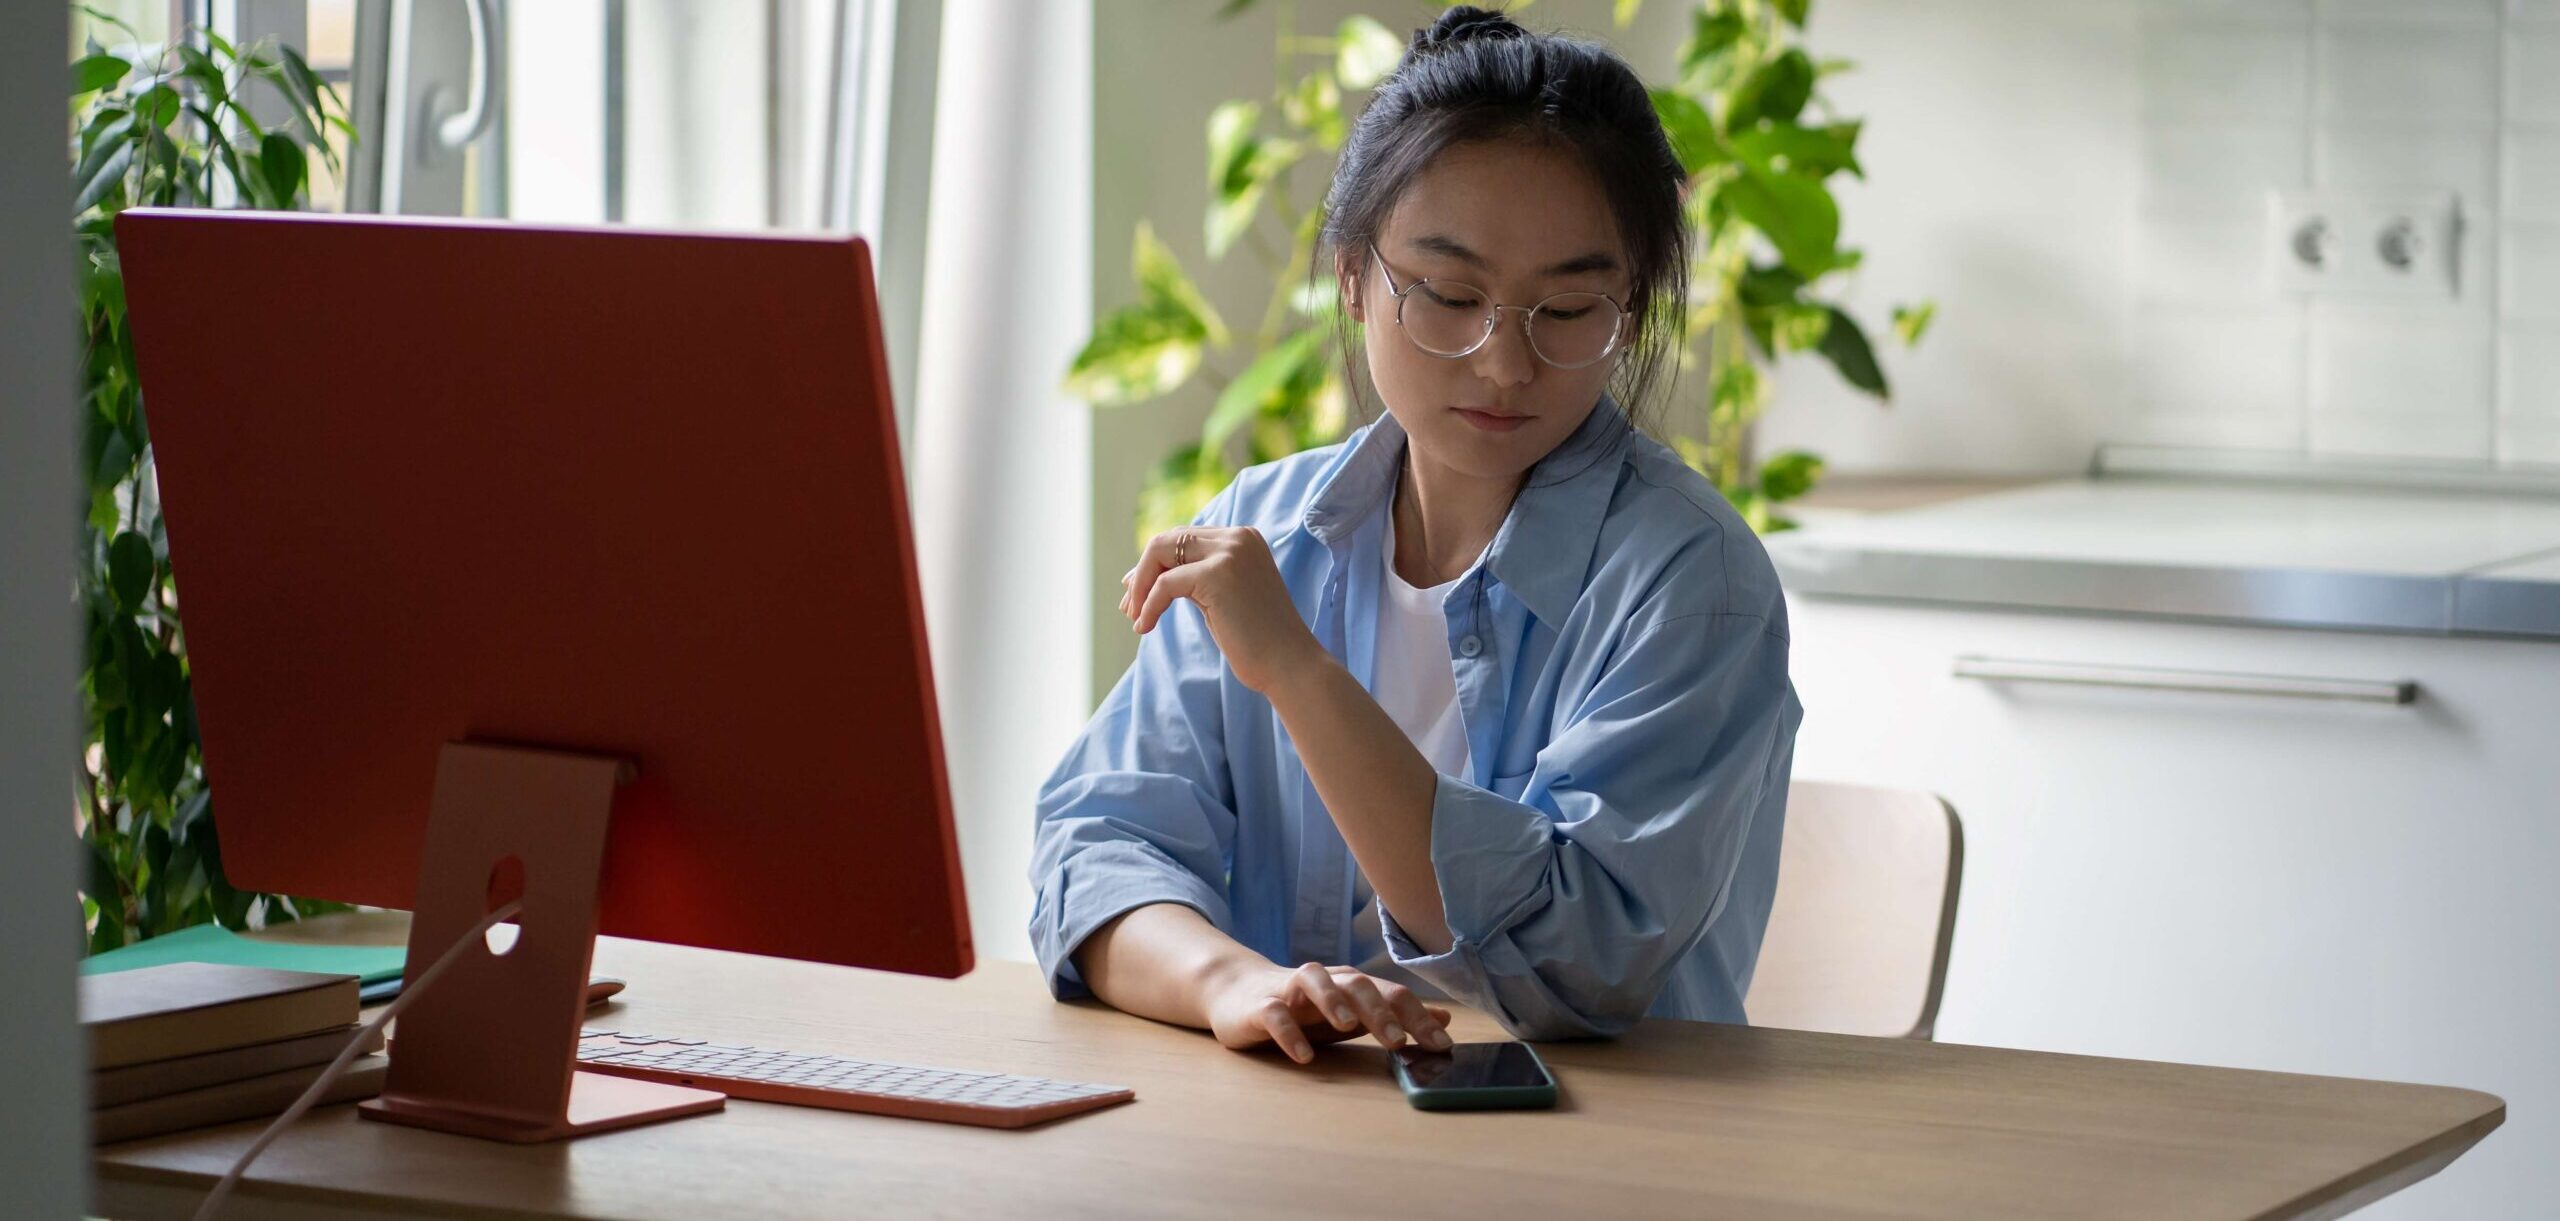 A student checks her phone while studying on her desktop computer at home